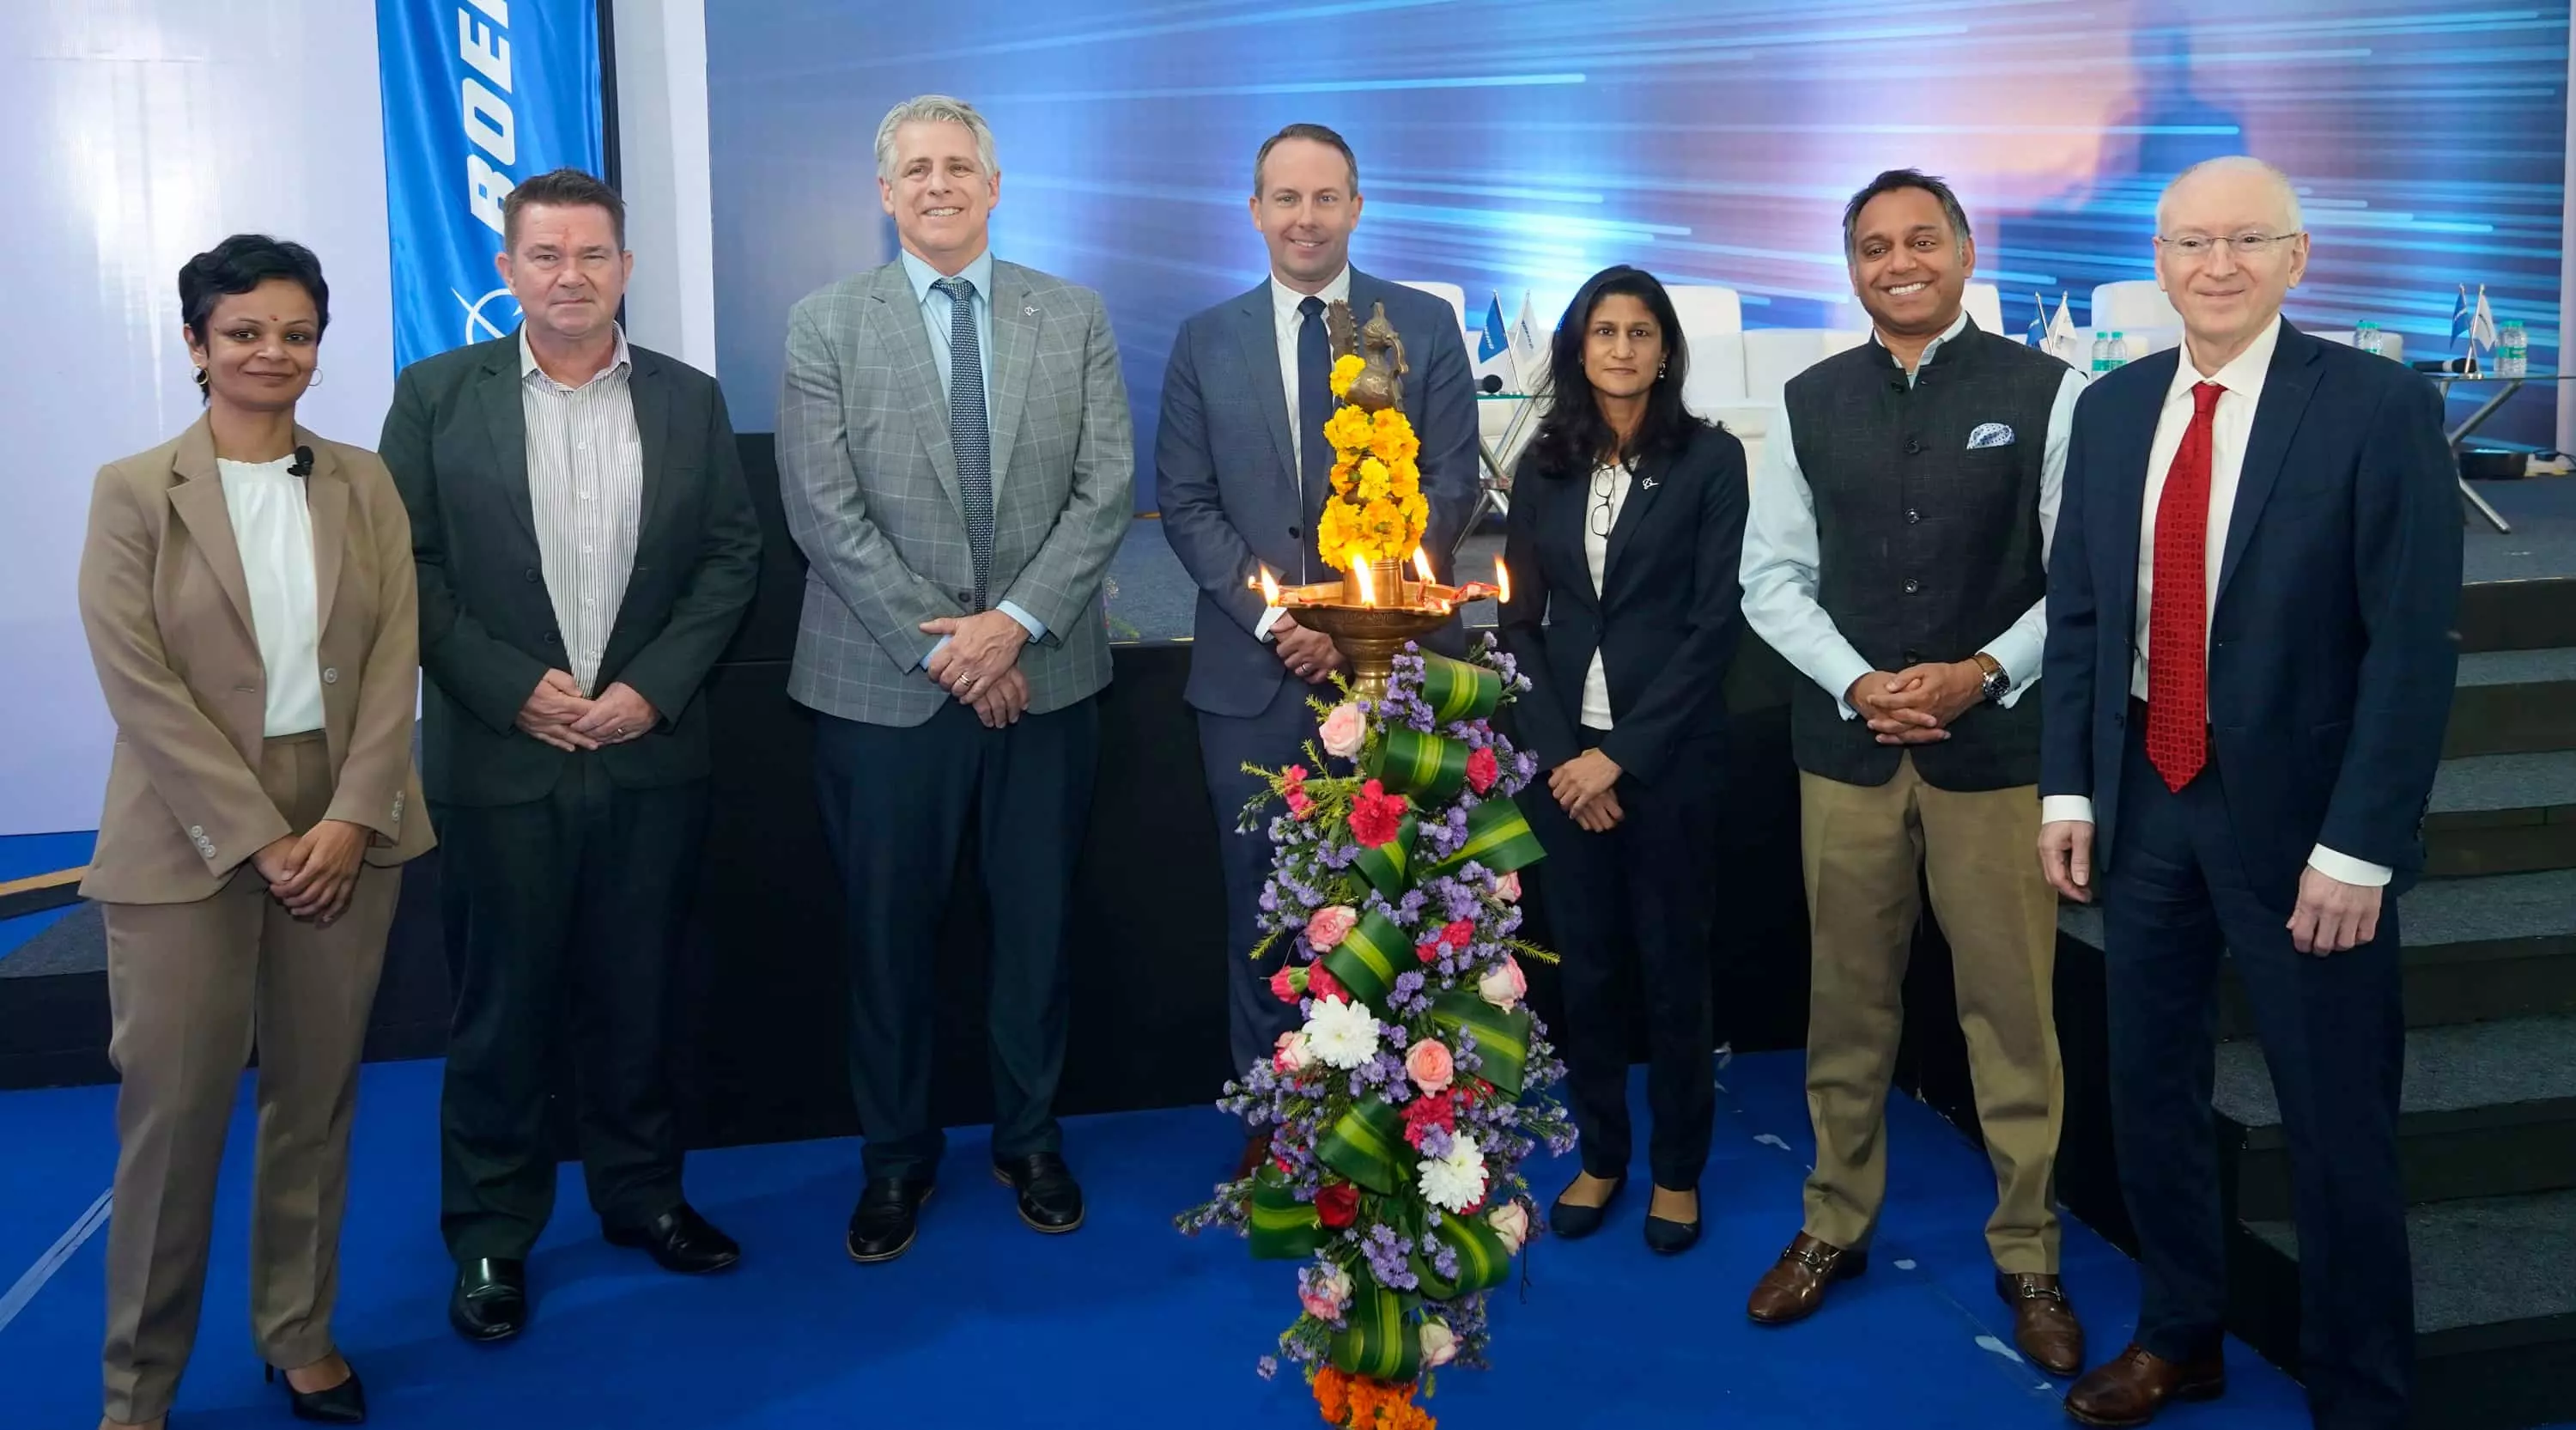 (From left): Kinjal Pande, Chief Executive Officer, DB Schenker, Cluster India and Indian Subcontinent, Kevin McMurtrie, Chief Commercial Officer, APAC, DB Schenker, Roland Schmid, Regional Vice President, Customer Support, Boeing Commercial Airplanes, Ryan Weir, Vice President, Commercial Sales and Marketing, India, Boeing Commercial Airplanes, Manisha Desai, Vice President & General Manager, Commercial Spares & Managed Parts, Boeing Global Services, Salil Gupte, President, Boeing India and Ben Funston, Vice President, Supply Chain Execution, Boeing Global Services